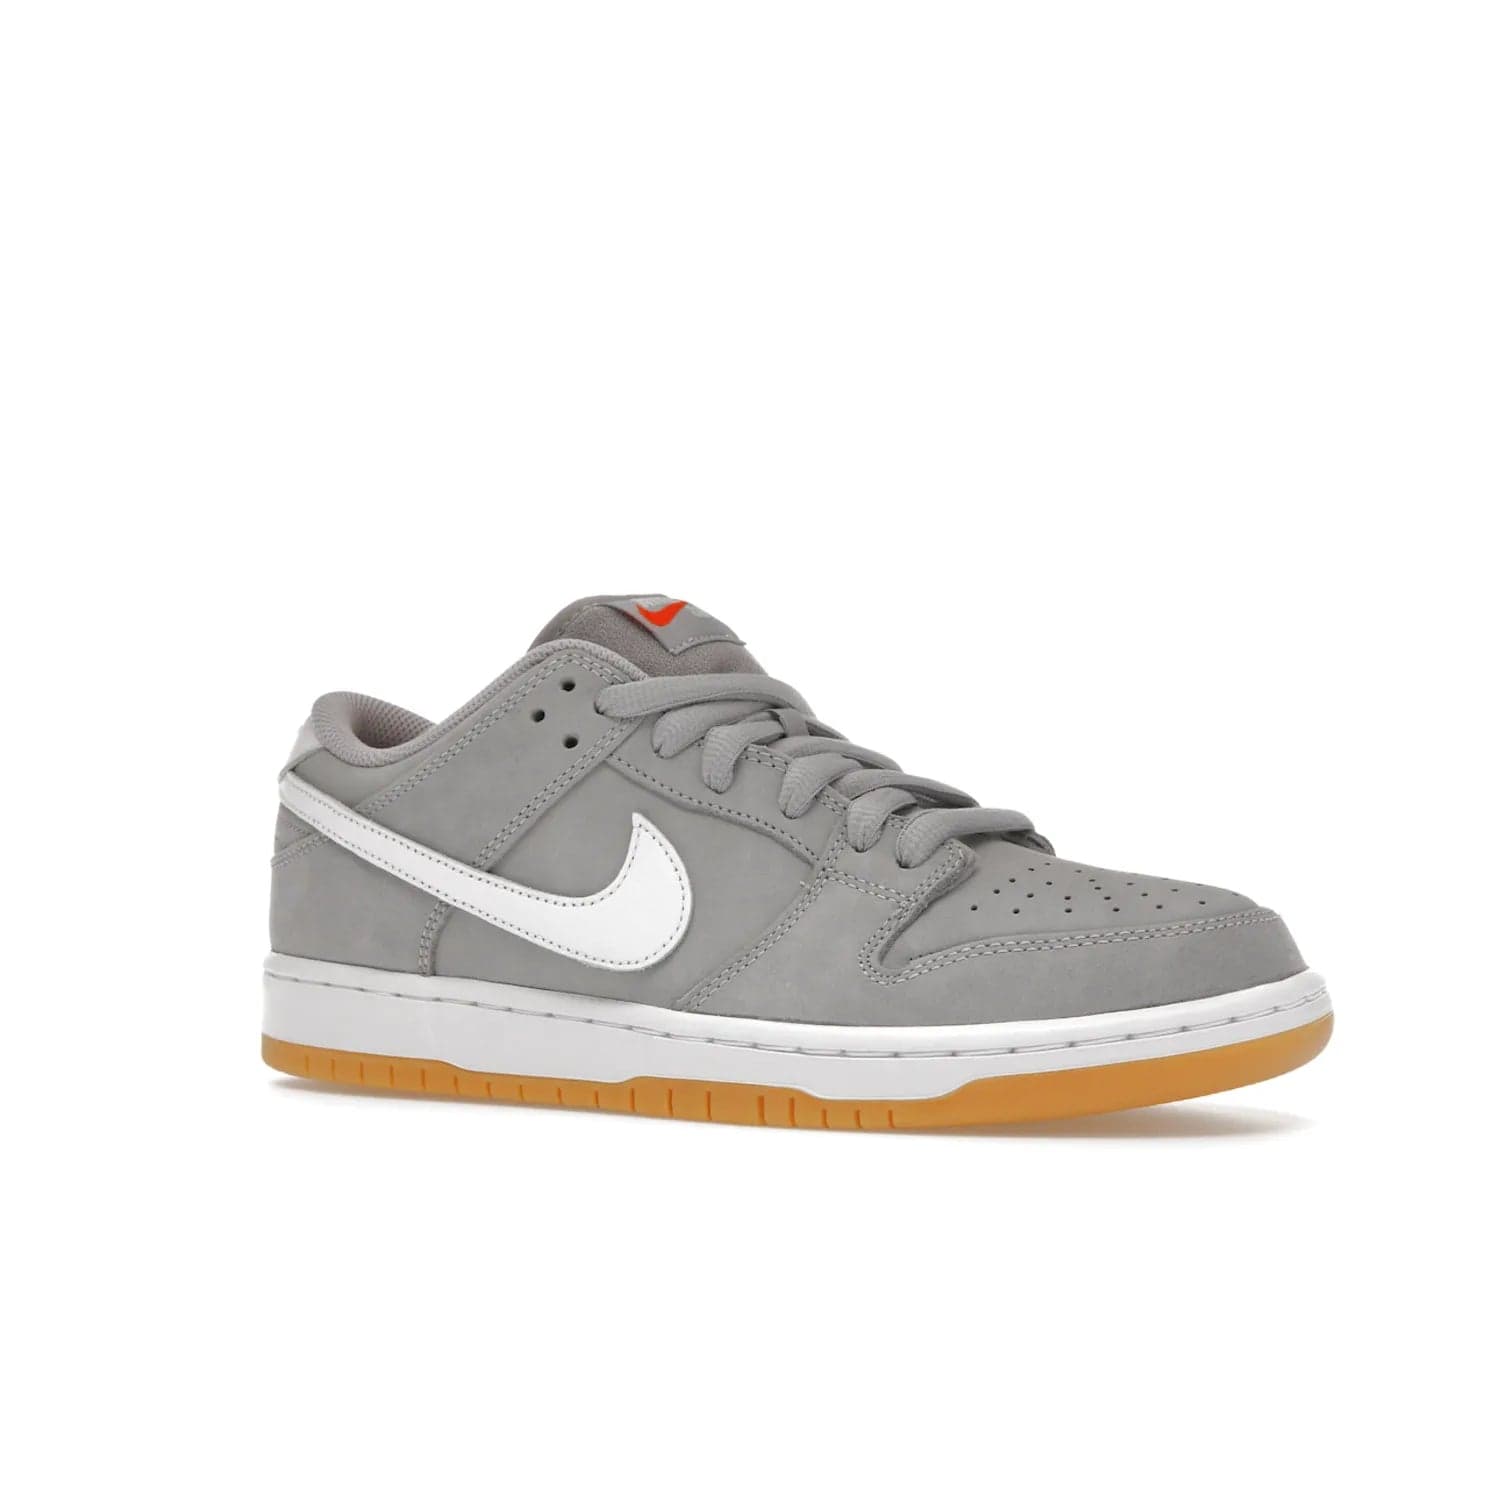 Nike SB Dunk Low Pro ISO Orange Label Wolf Grey Gum - Image 4 - Only at www.BallersClubKickz.com - Introducing Nike's SB Dunk Low Pro ISO Orange Label Wolf Grey Gum - a stylish shoe with a premium Wolf Grey upper, white leather Nike Swoosh, and an eye-catching gum outsole. With special Nike branding and packaging, this shoe adds a unique fashion statement. Out Feb. 24, 2023.